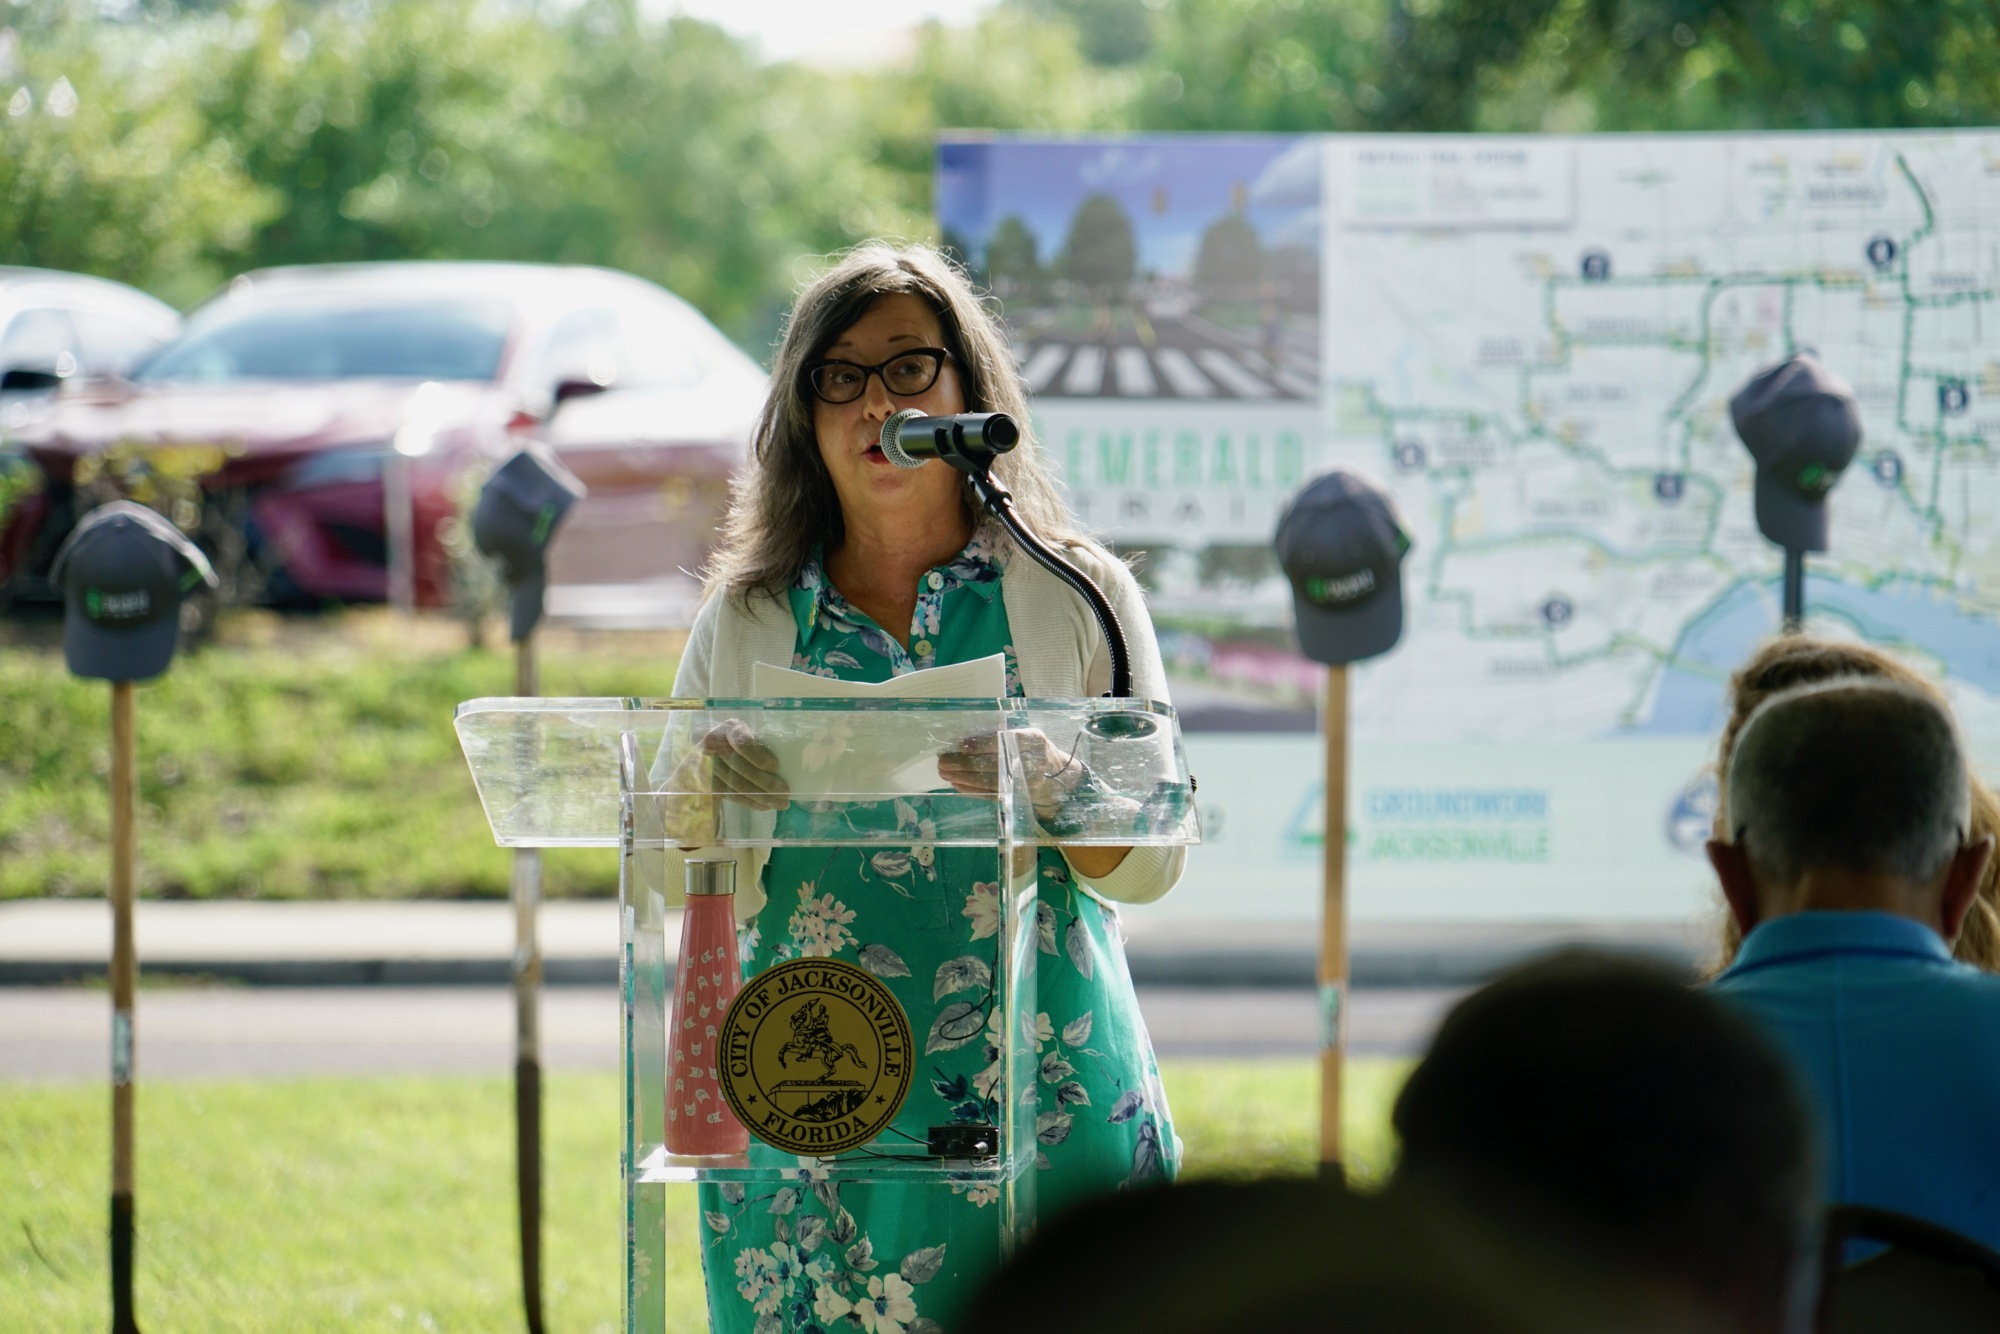 “The Emerald Trail is an historic opportunity,” Groundwork Jacksonville CEO Kay Ehas said at the groundbreaking Aug. 24.